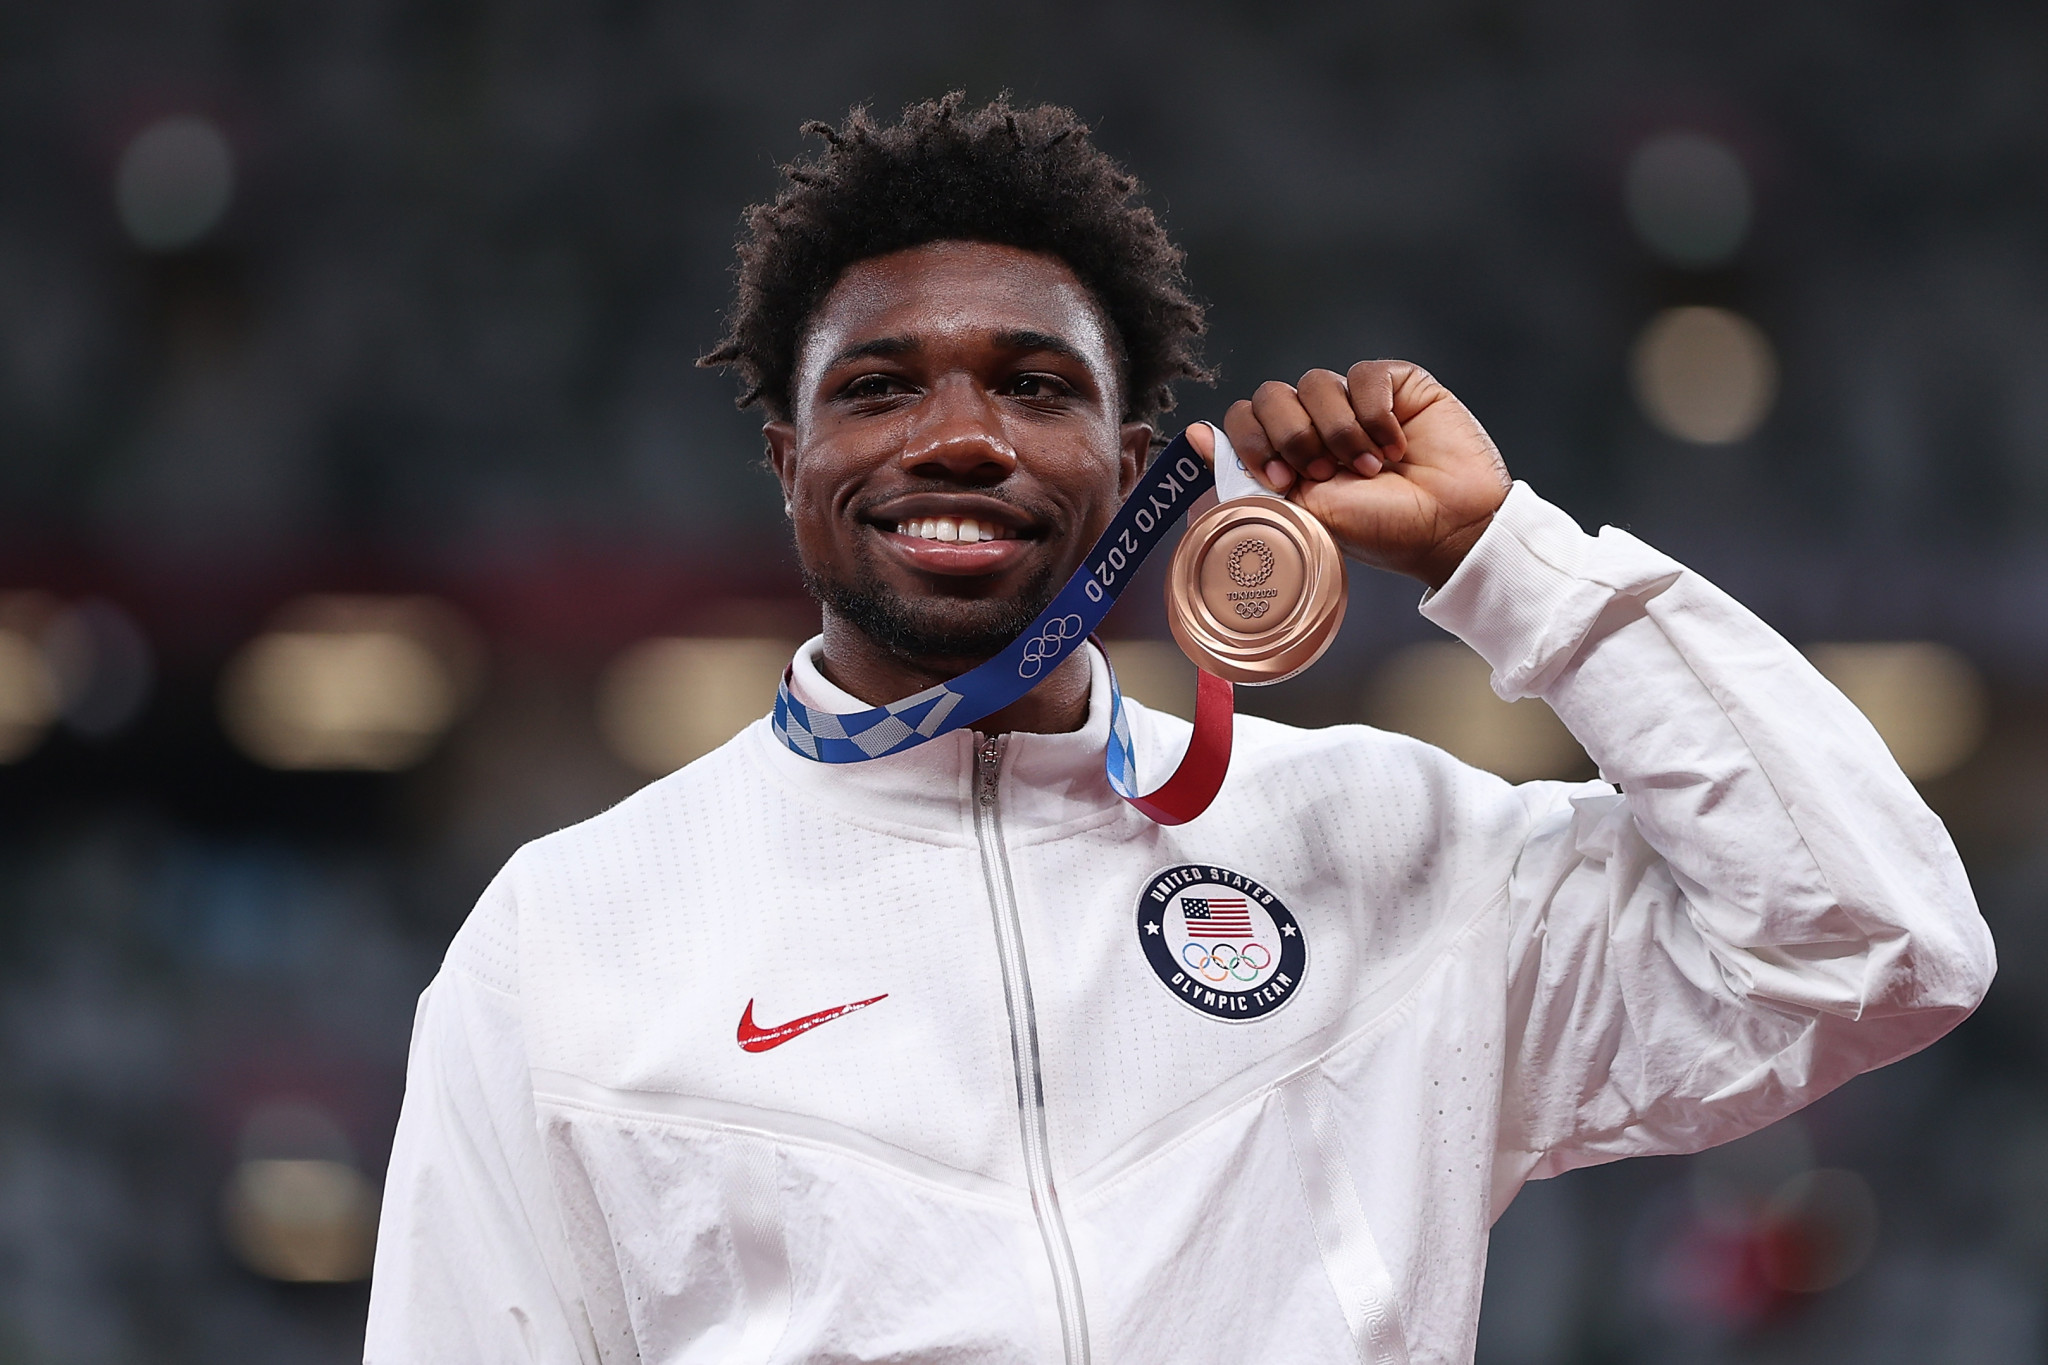 Noah Lyles won 200m bronze at the Tokyo 2020 Olympics ©Getty Images